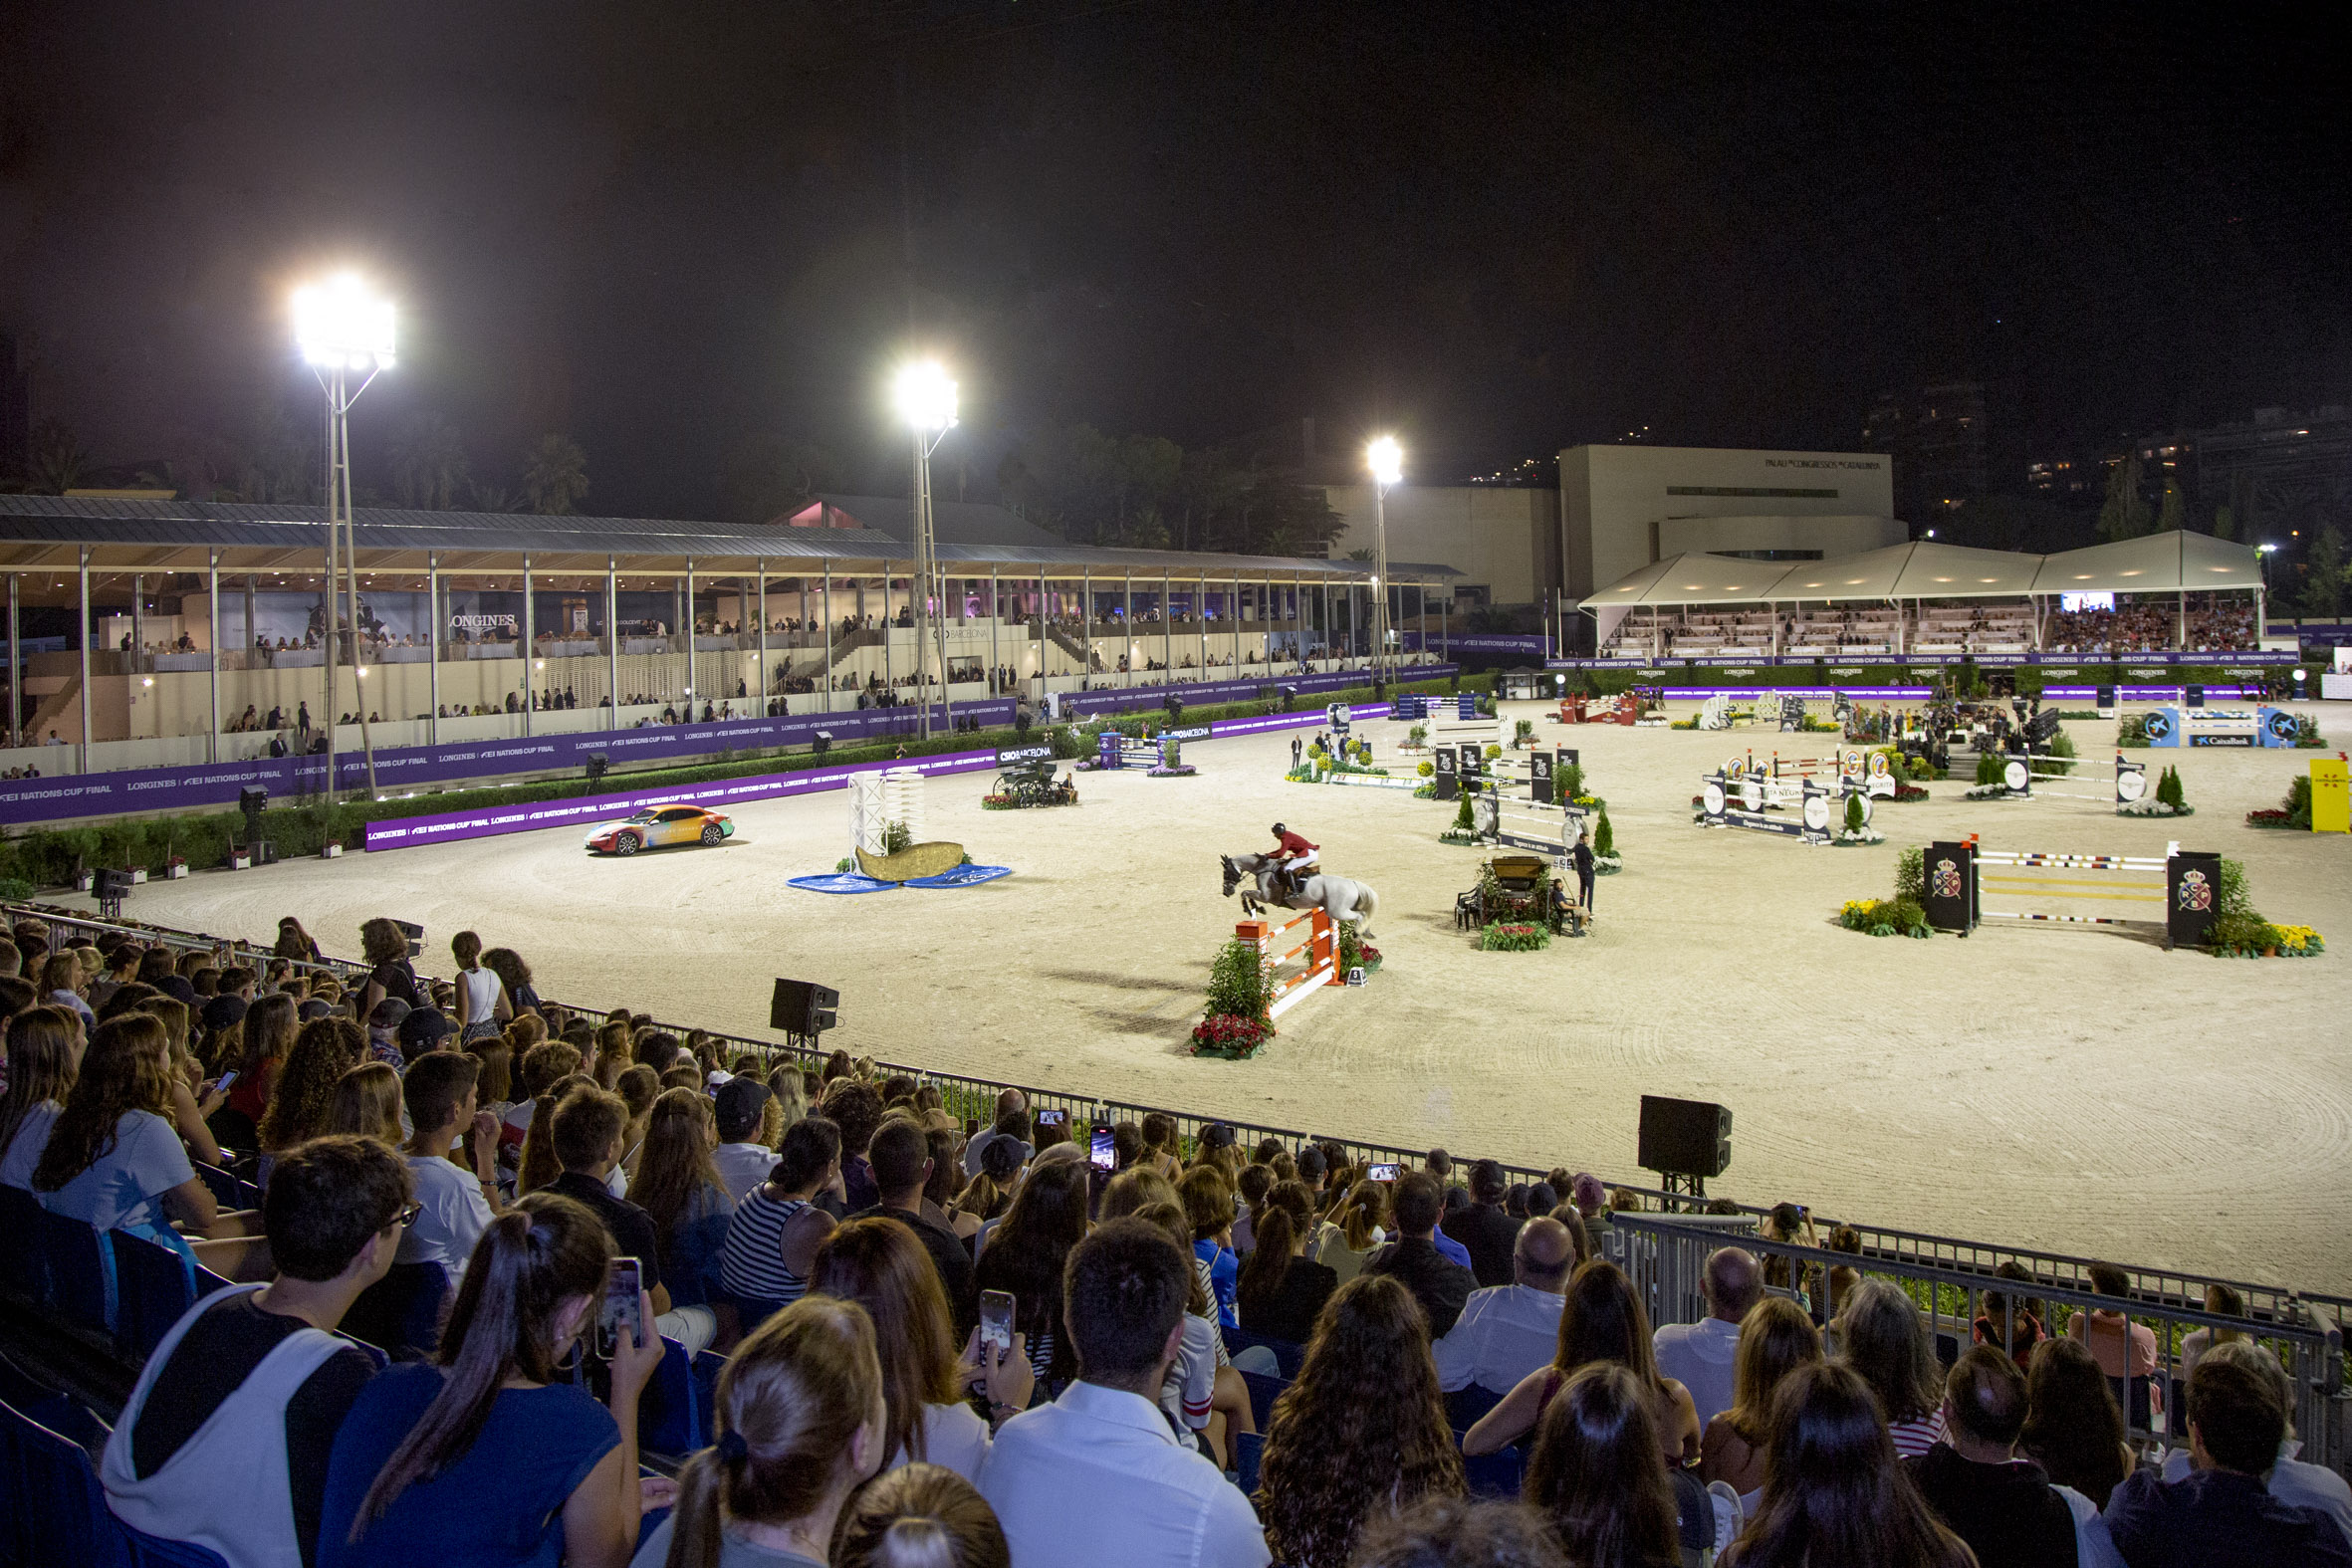 CSIO Barcelona successfully concludes its 111th edition